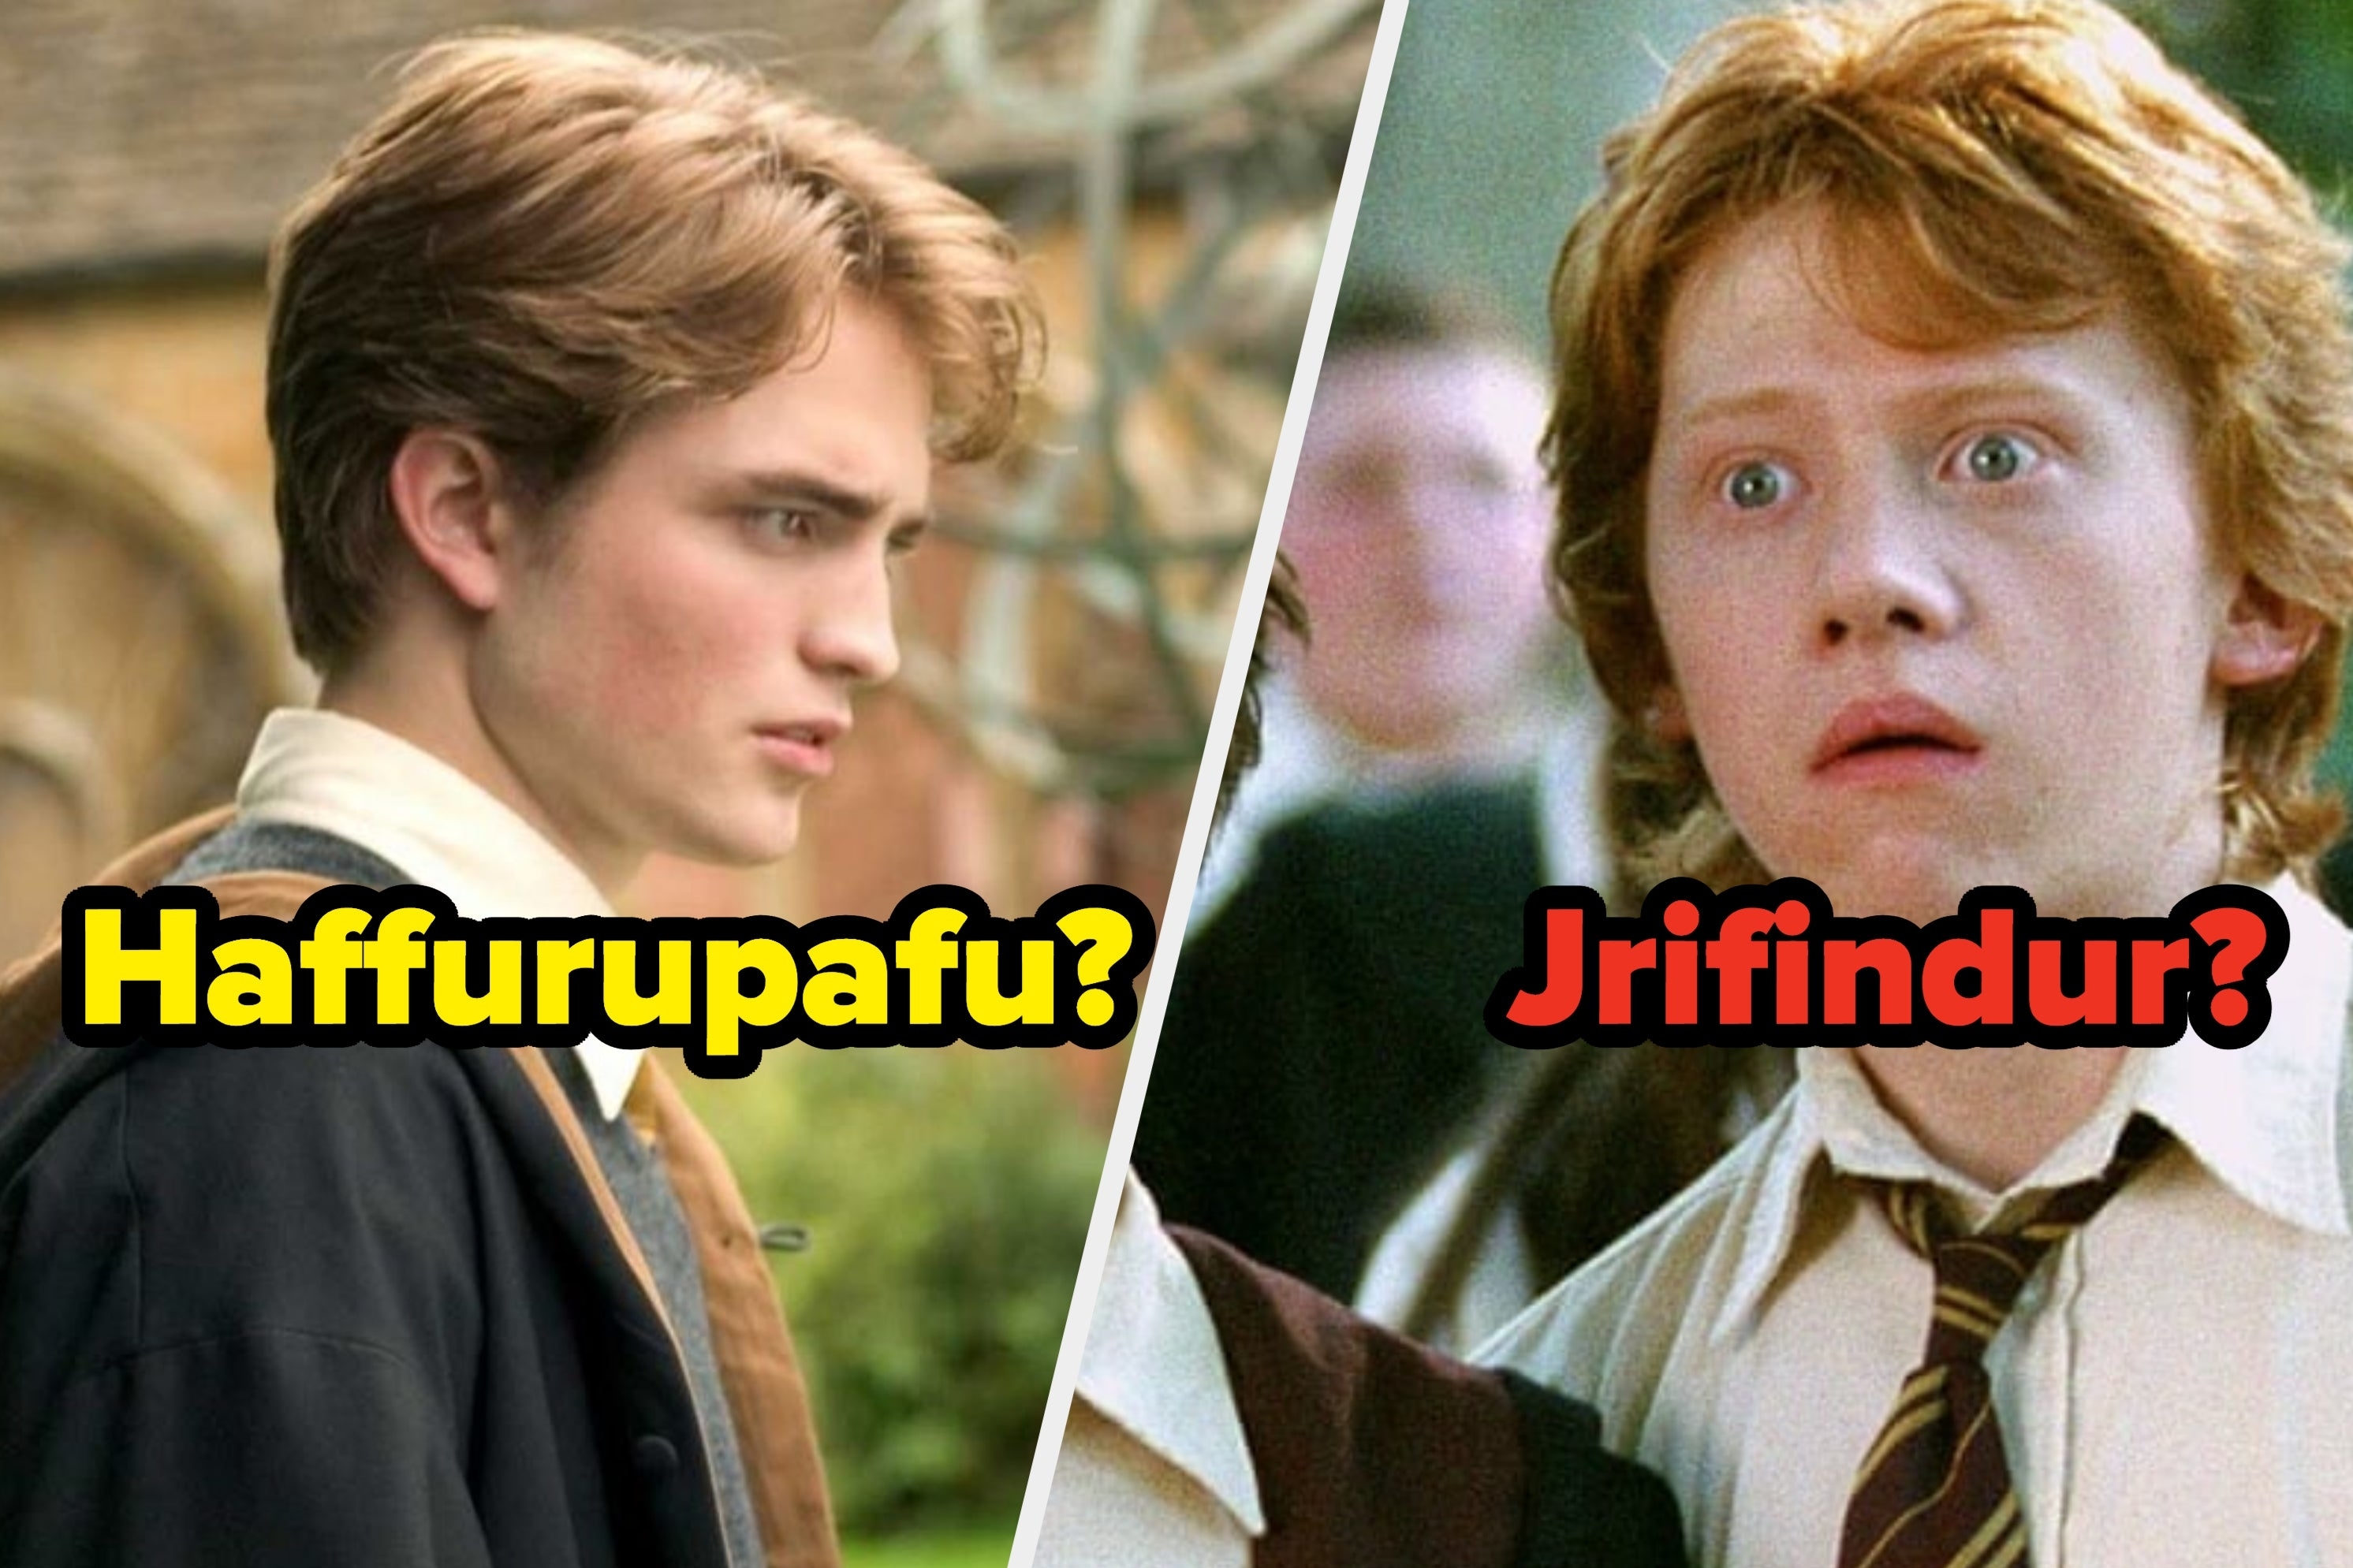 Side-by-side images of Cedric Diggory and Ron Weasley with humorous text mimicking Harry Potter house names